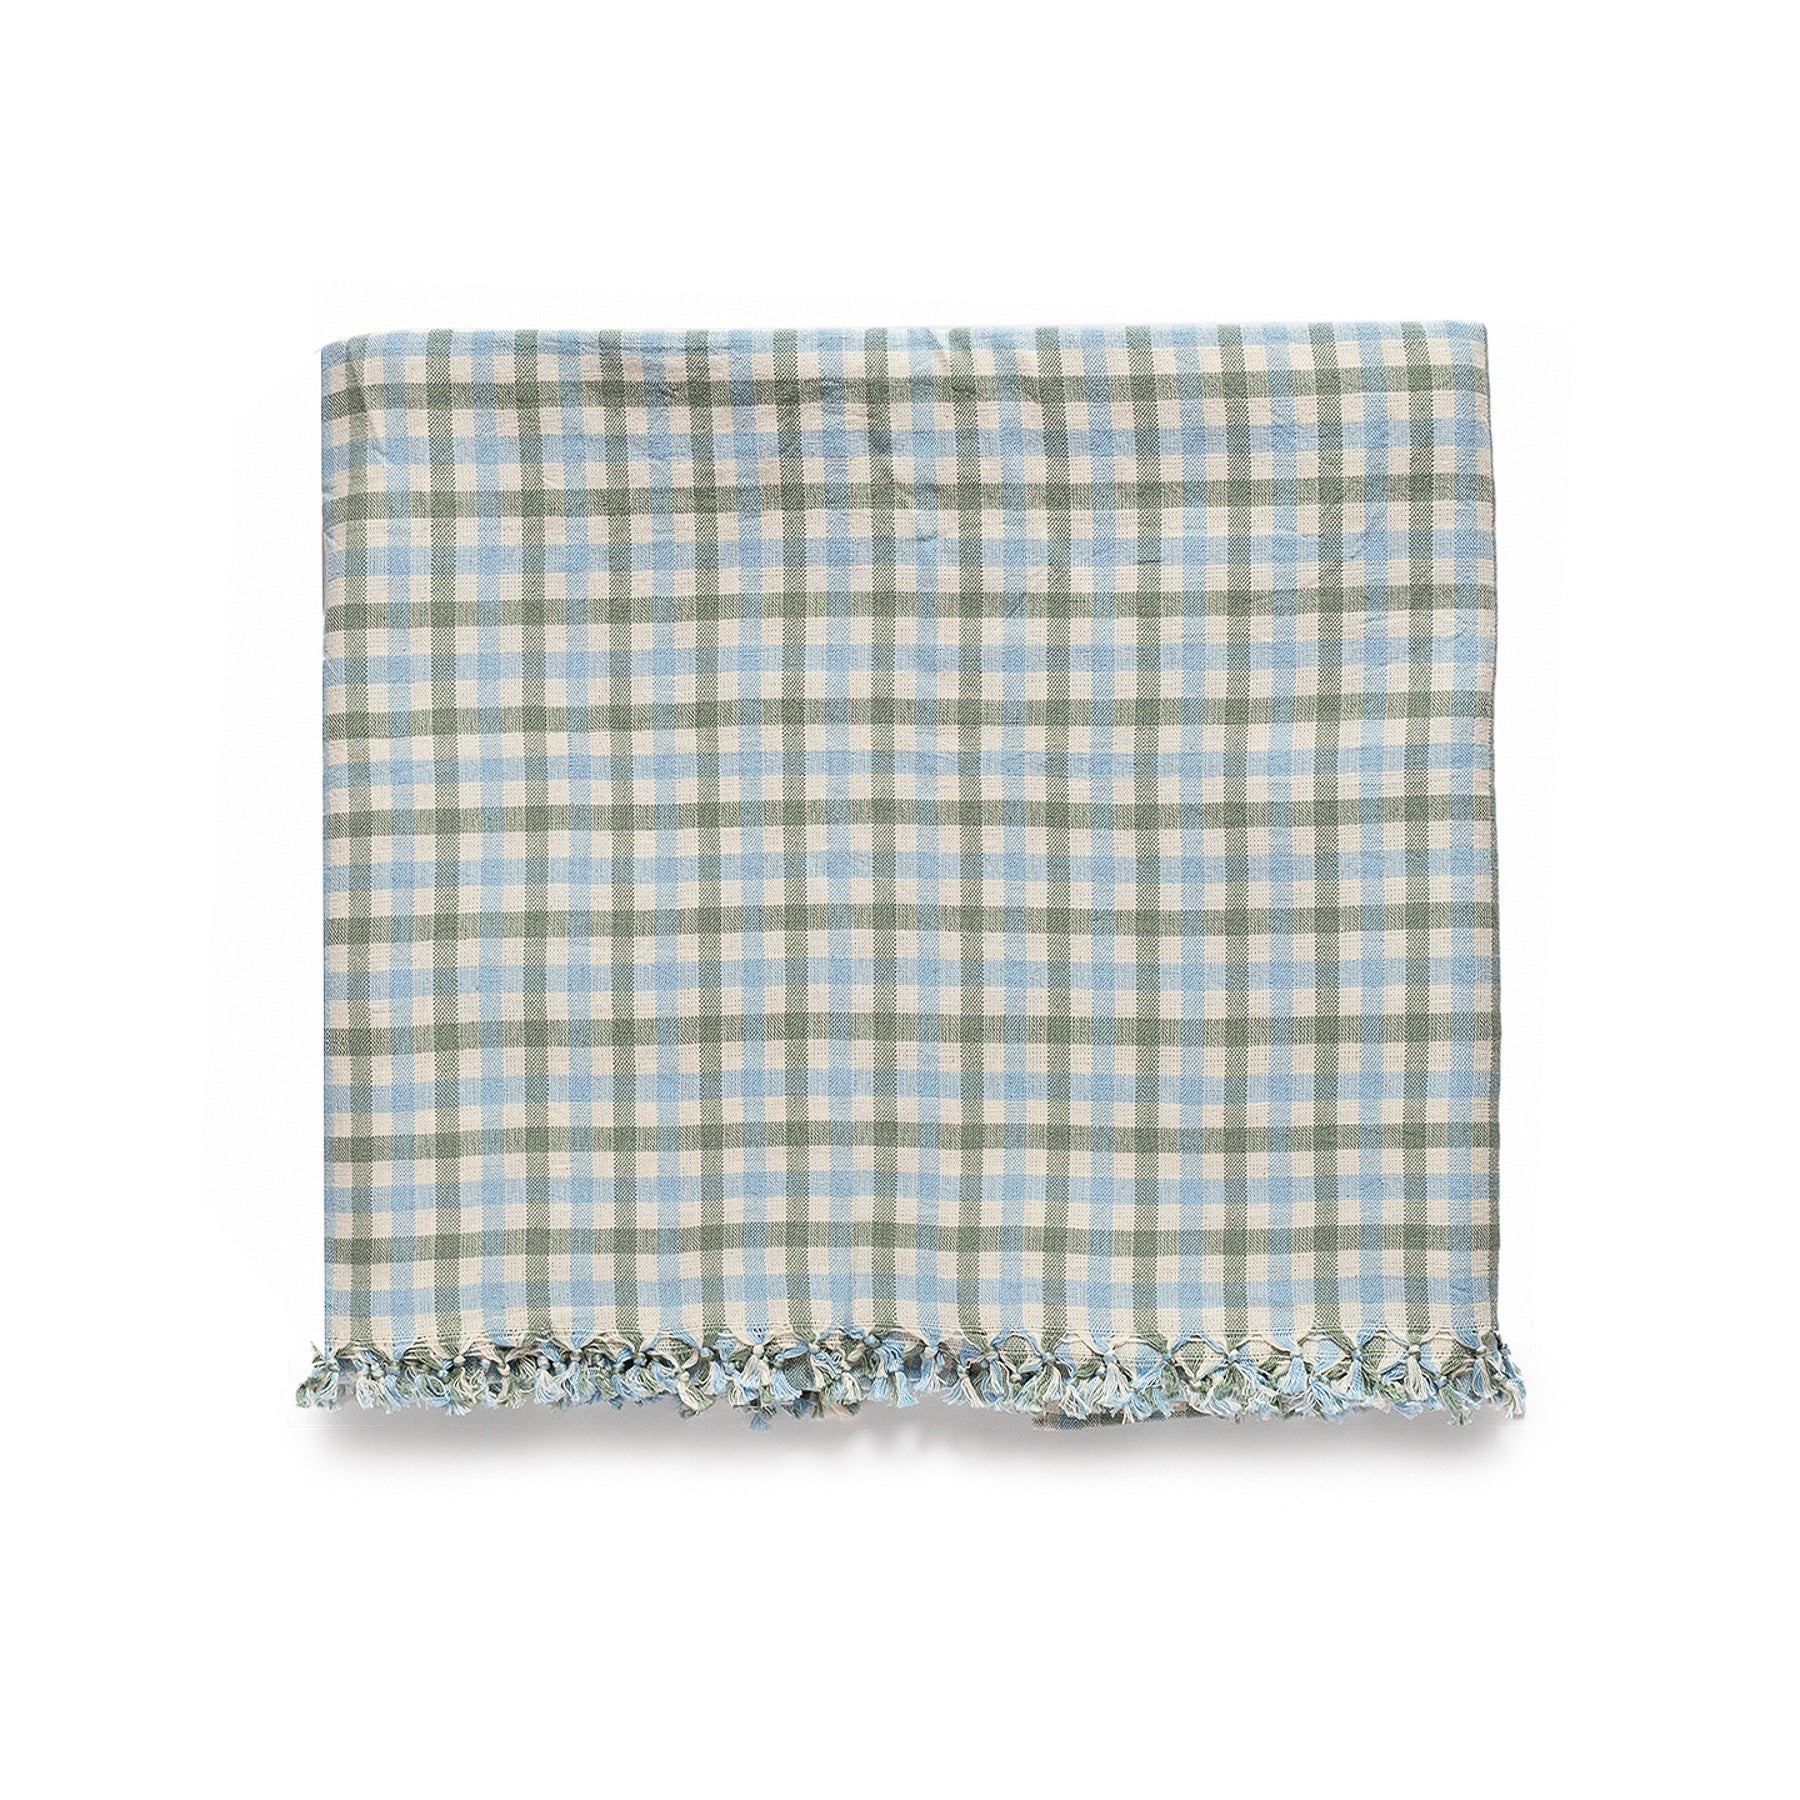 Heather Taylor Home Willow Tablecloth